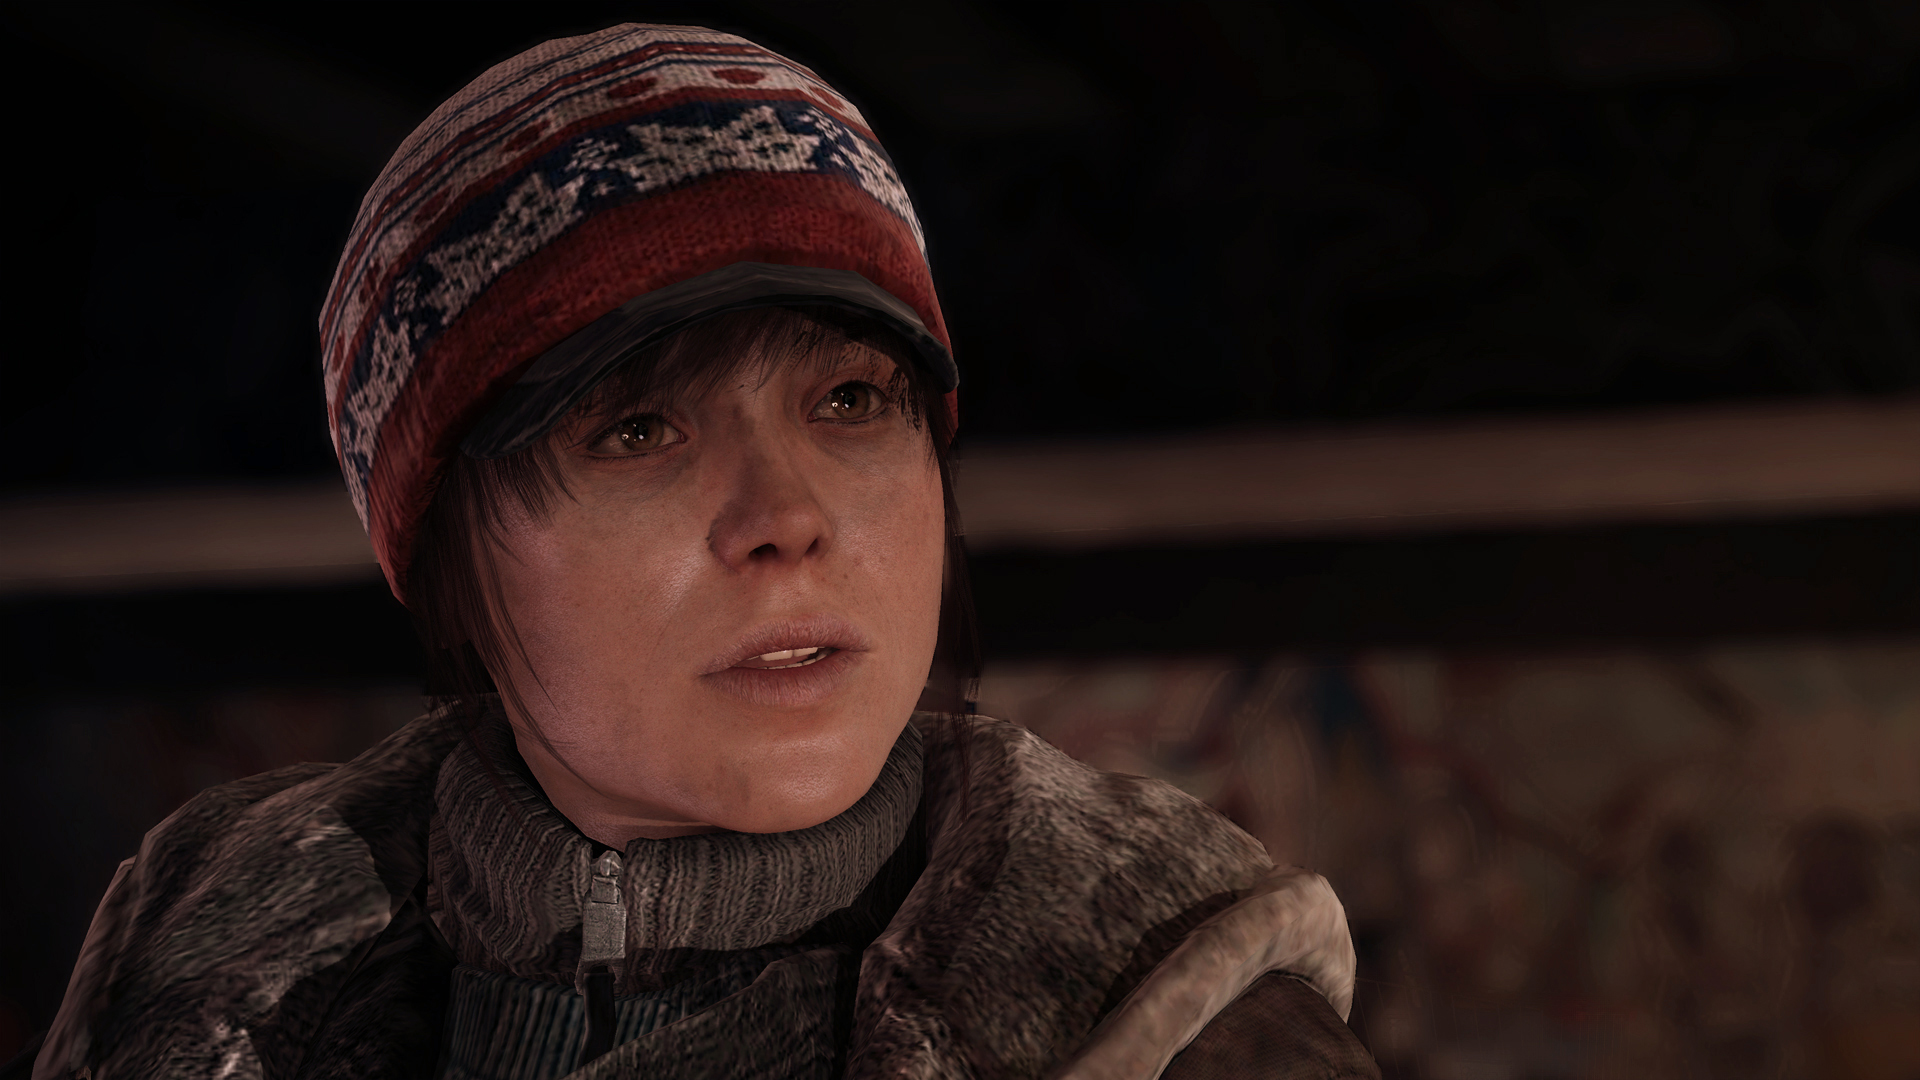 achterlijk persoon drie definitief Beyond: Two Souls Preview for PlayStation 3 (PS3) - Cheat Code Central